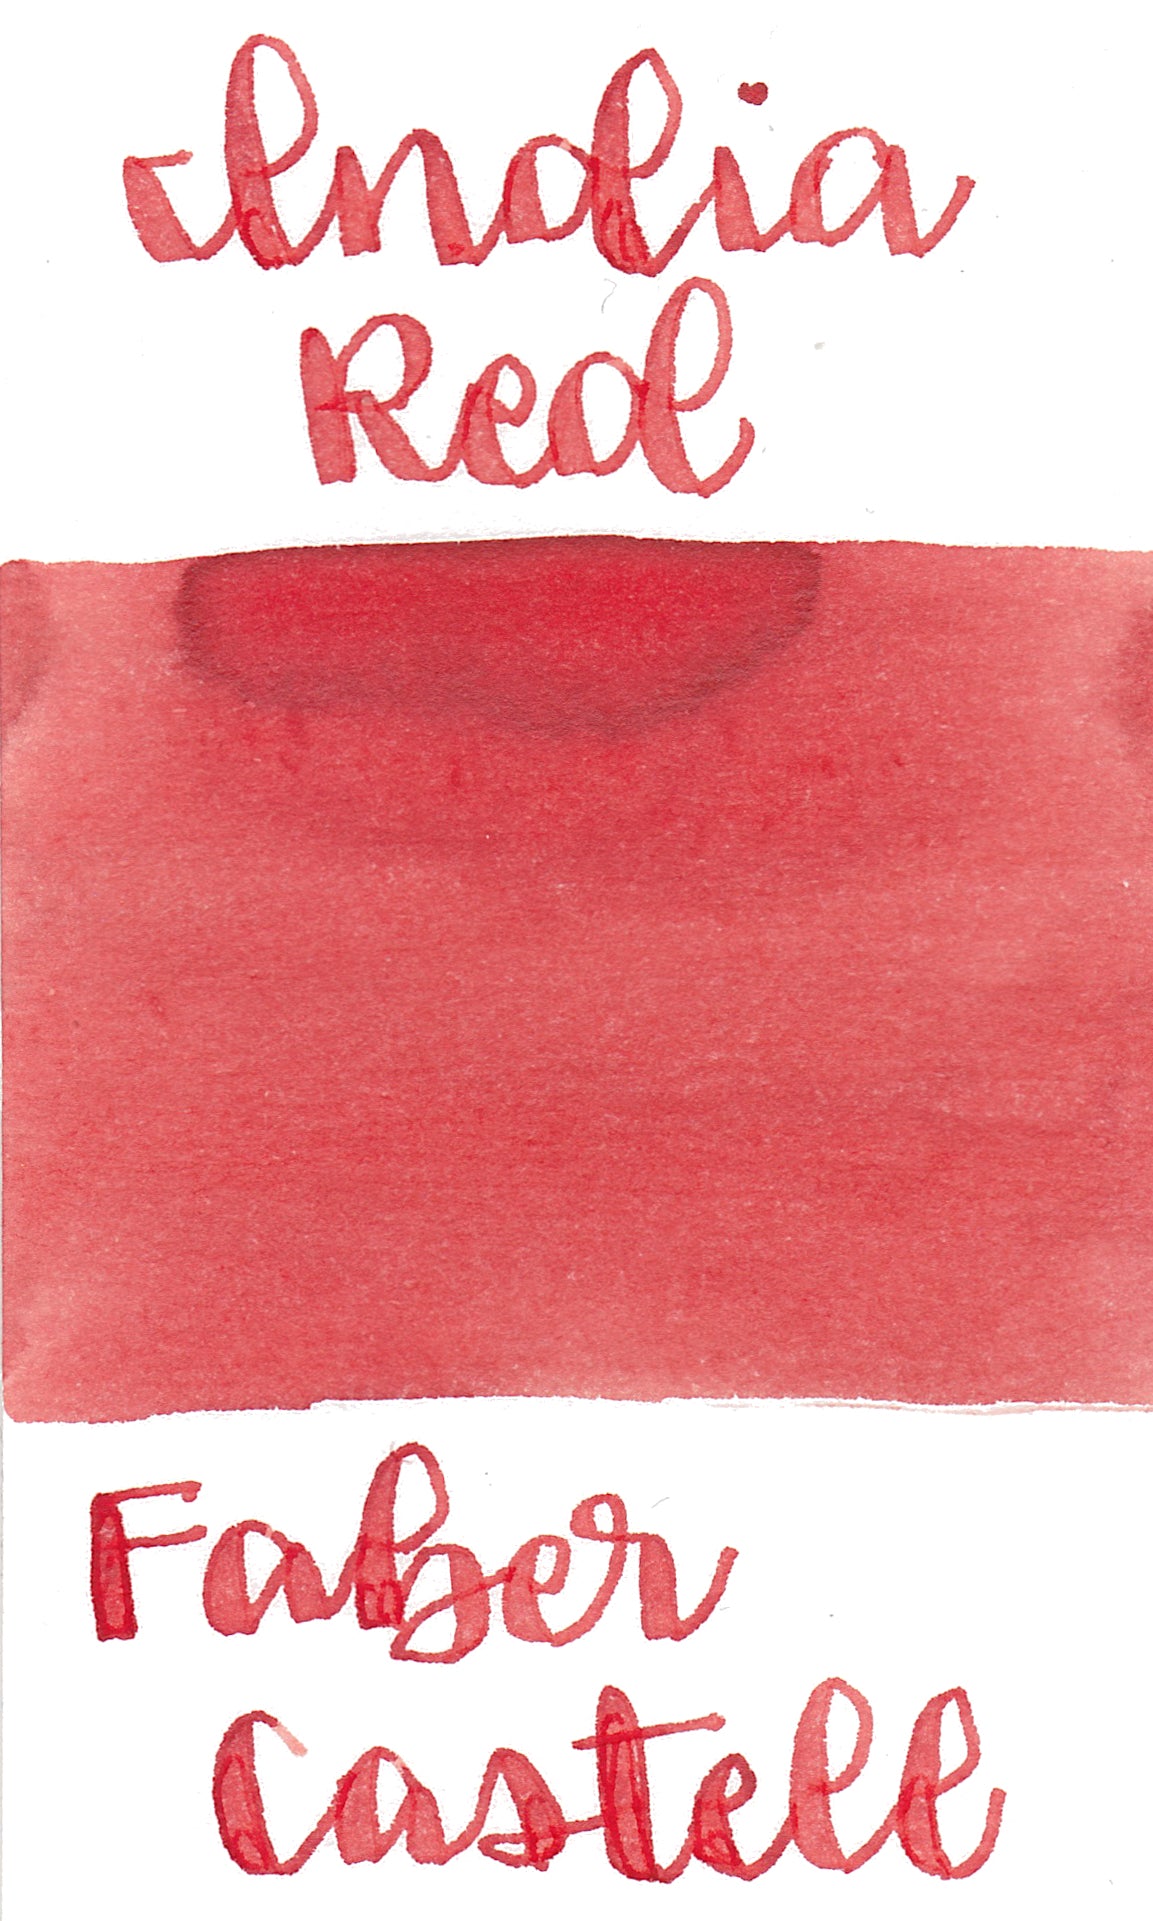 Faber-Castell India Red